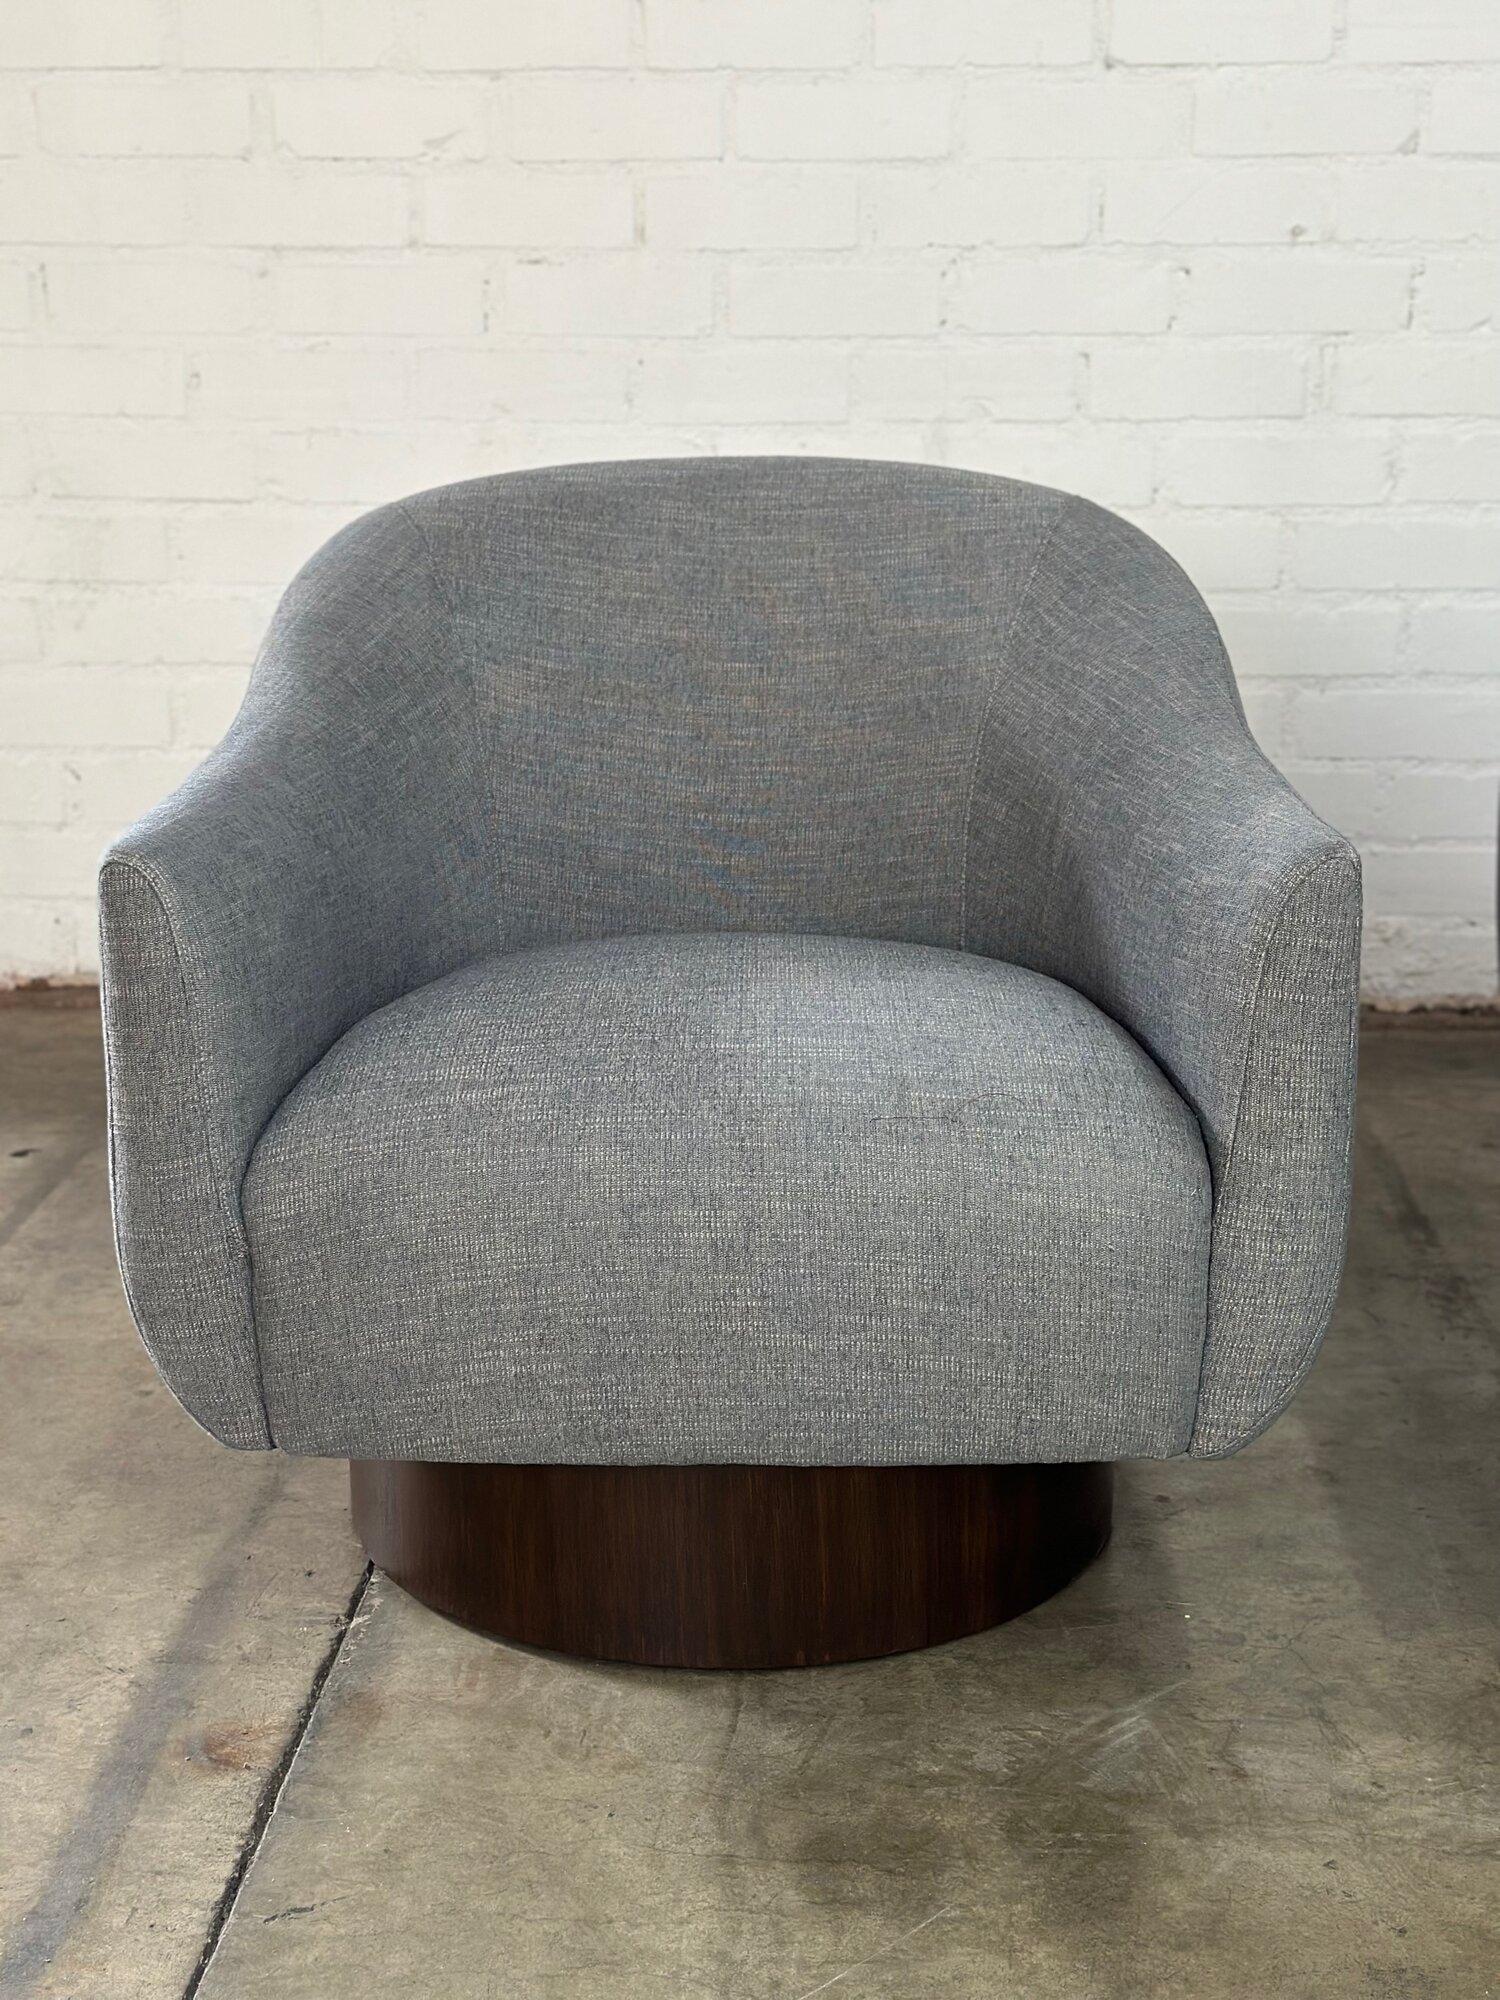 W31.5 D33 H30.5 SW22 SD22 SH15 AH23

Barrel Lounge Chairs with a walnut finished plinth base. Item has brand new Grayish Blue upholstery, in the color Fog. Both chairs are structurally sound and sturdy.

Price is for the pair *

circa 2000’s